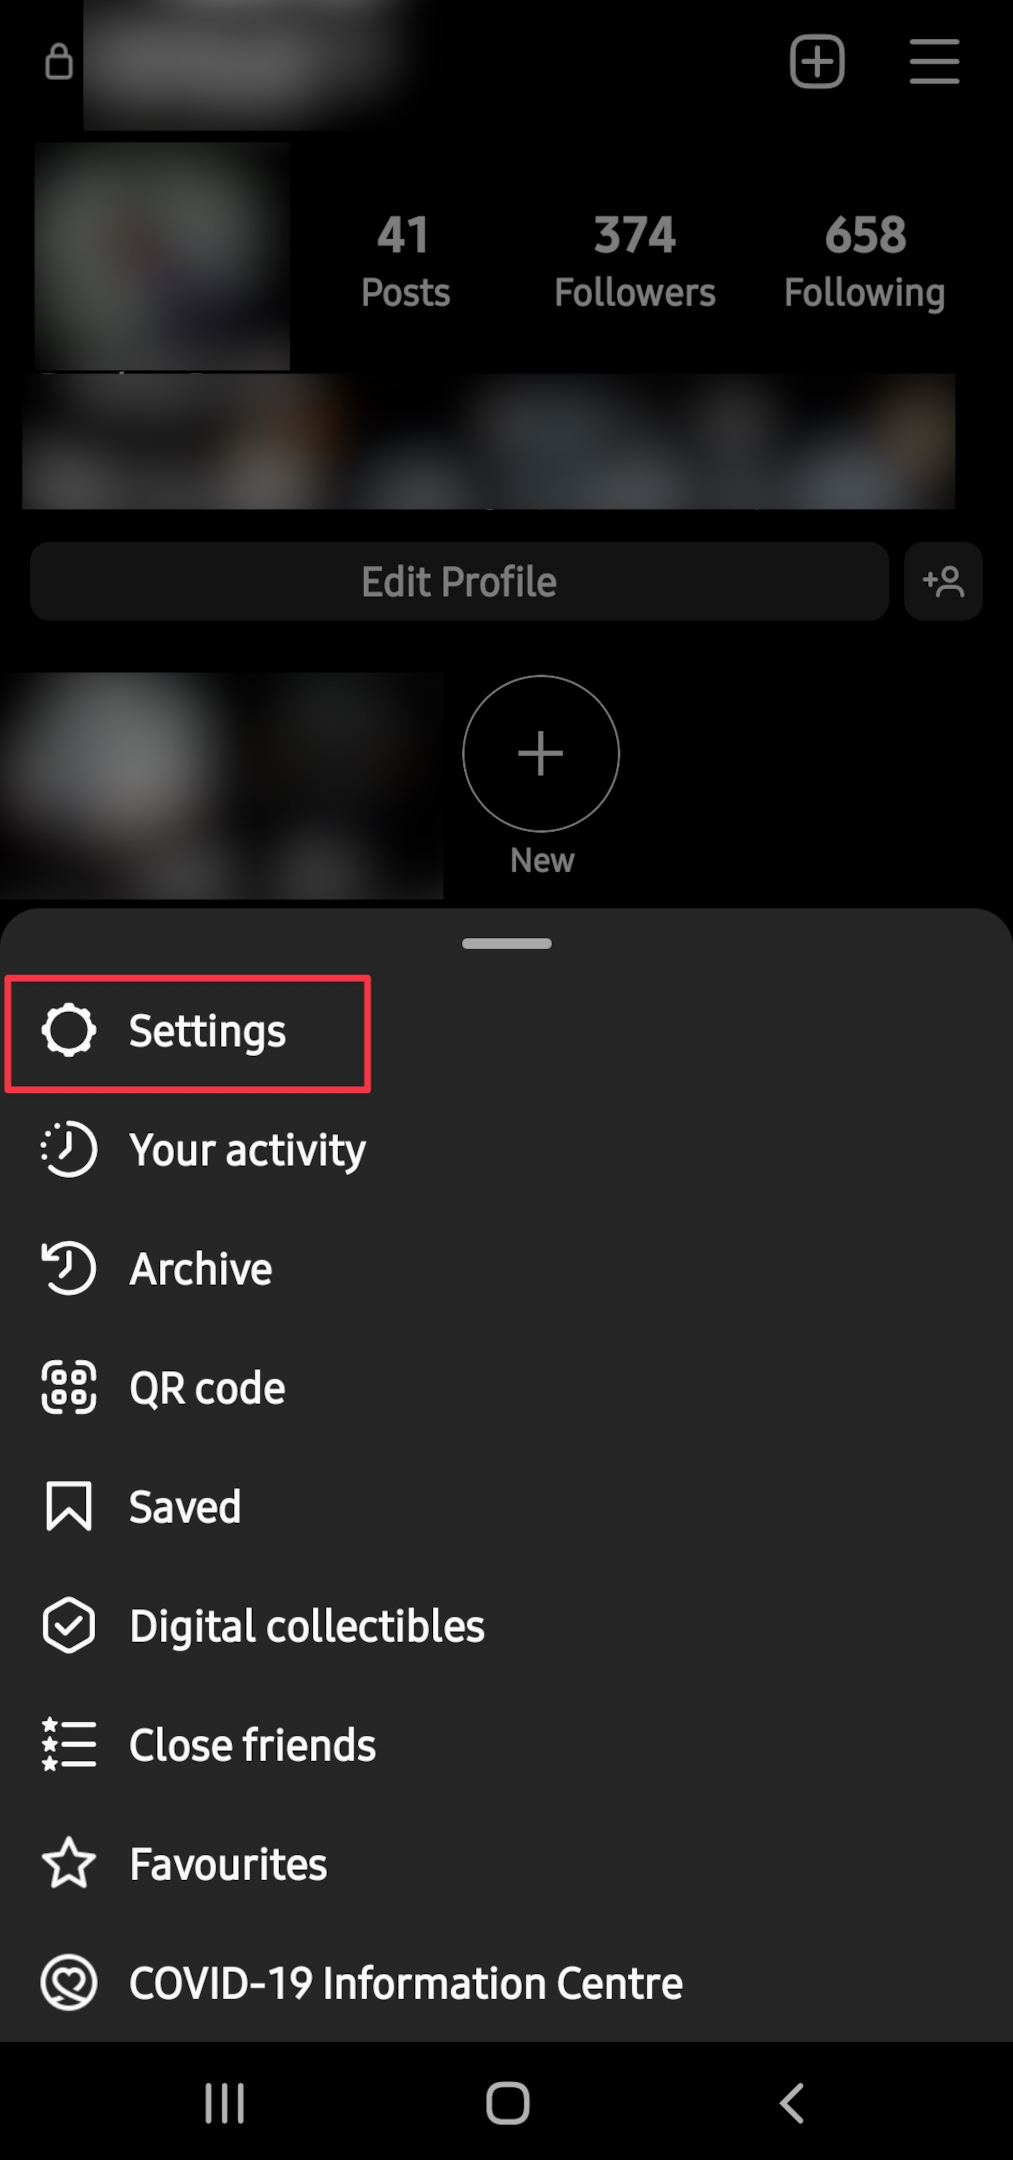 Remote.tools shows how to find the settings menu to edit the account type